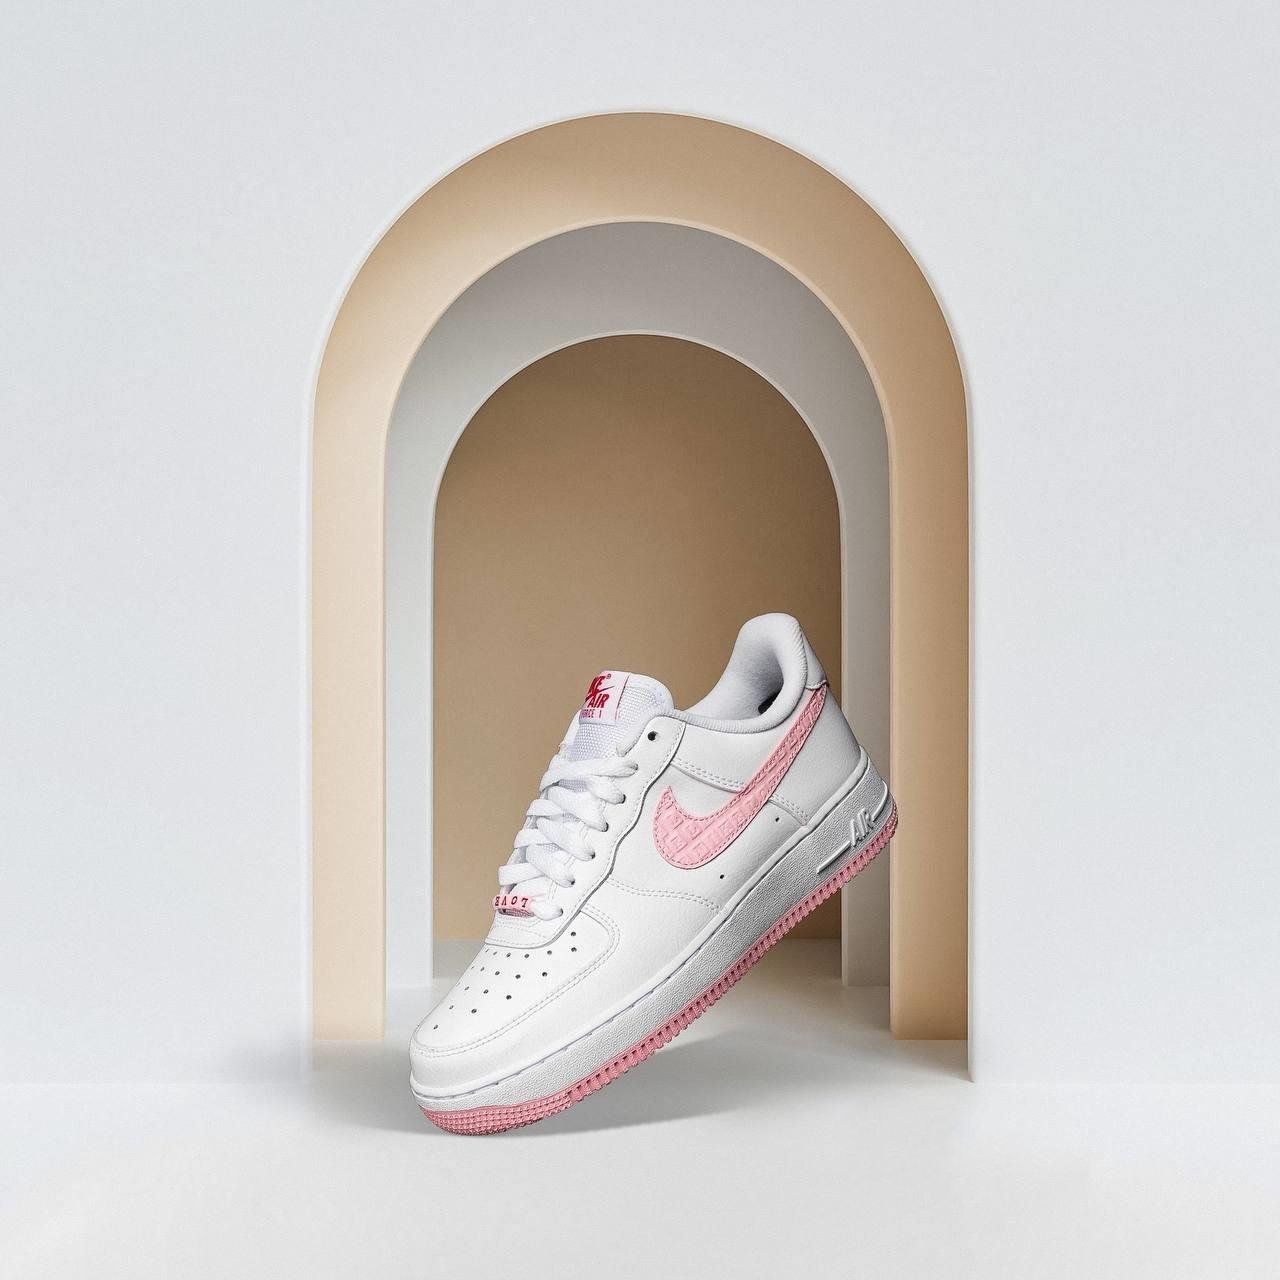 GIÀY NỮ NIKE AIR FORCE 1 07 LOW VD VALENTINE S DAY WHITE ATMOSPHERE UNIVERSITY RED SAIL DQ9320-100 8